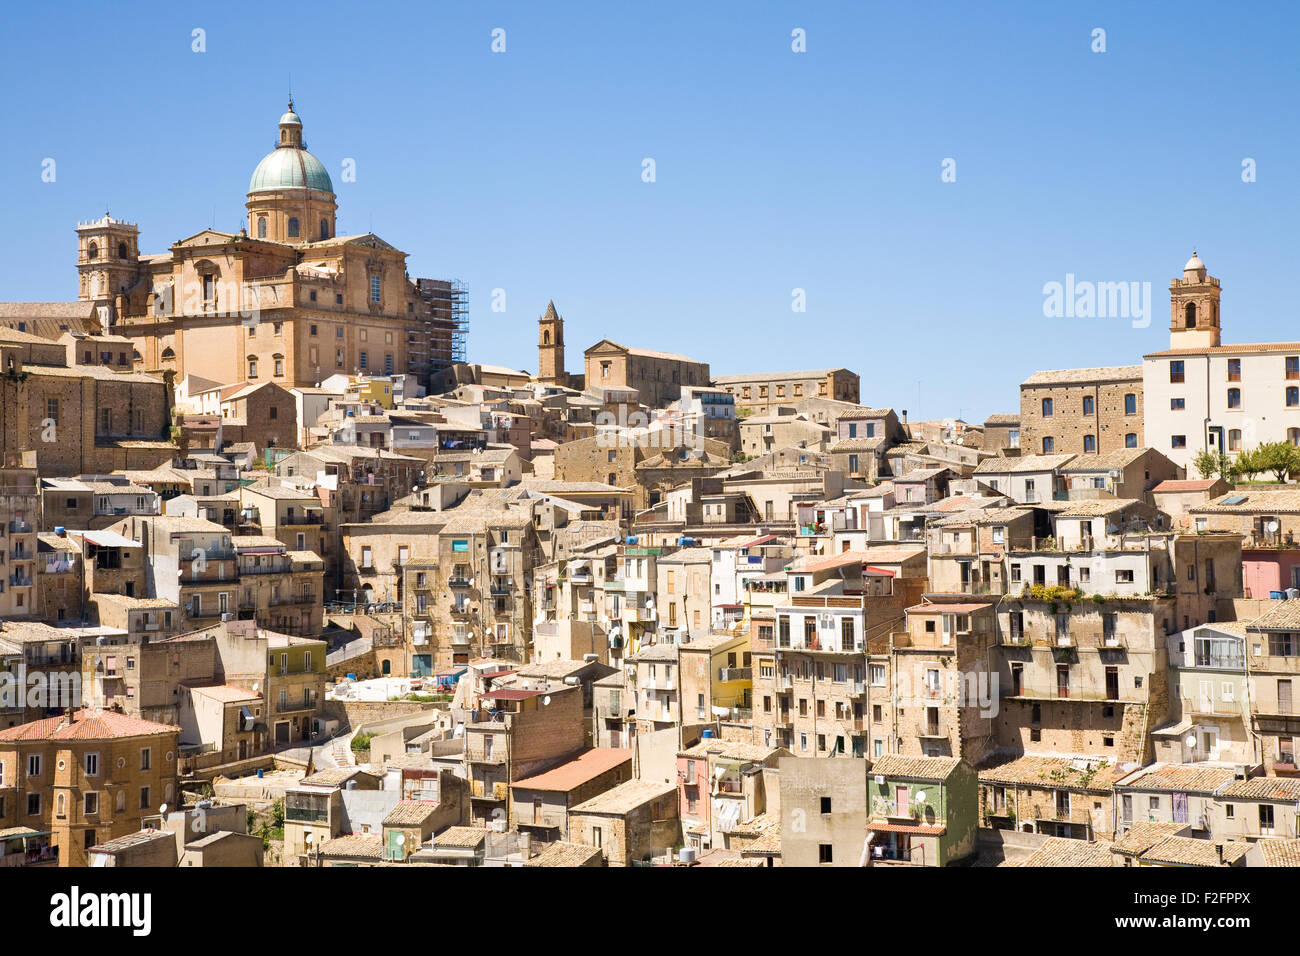 A cityscape of Piazza Armerina, a hilltop village in the Enna province of Sicily, Italy Stock Photo